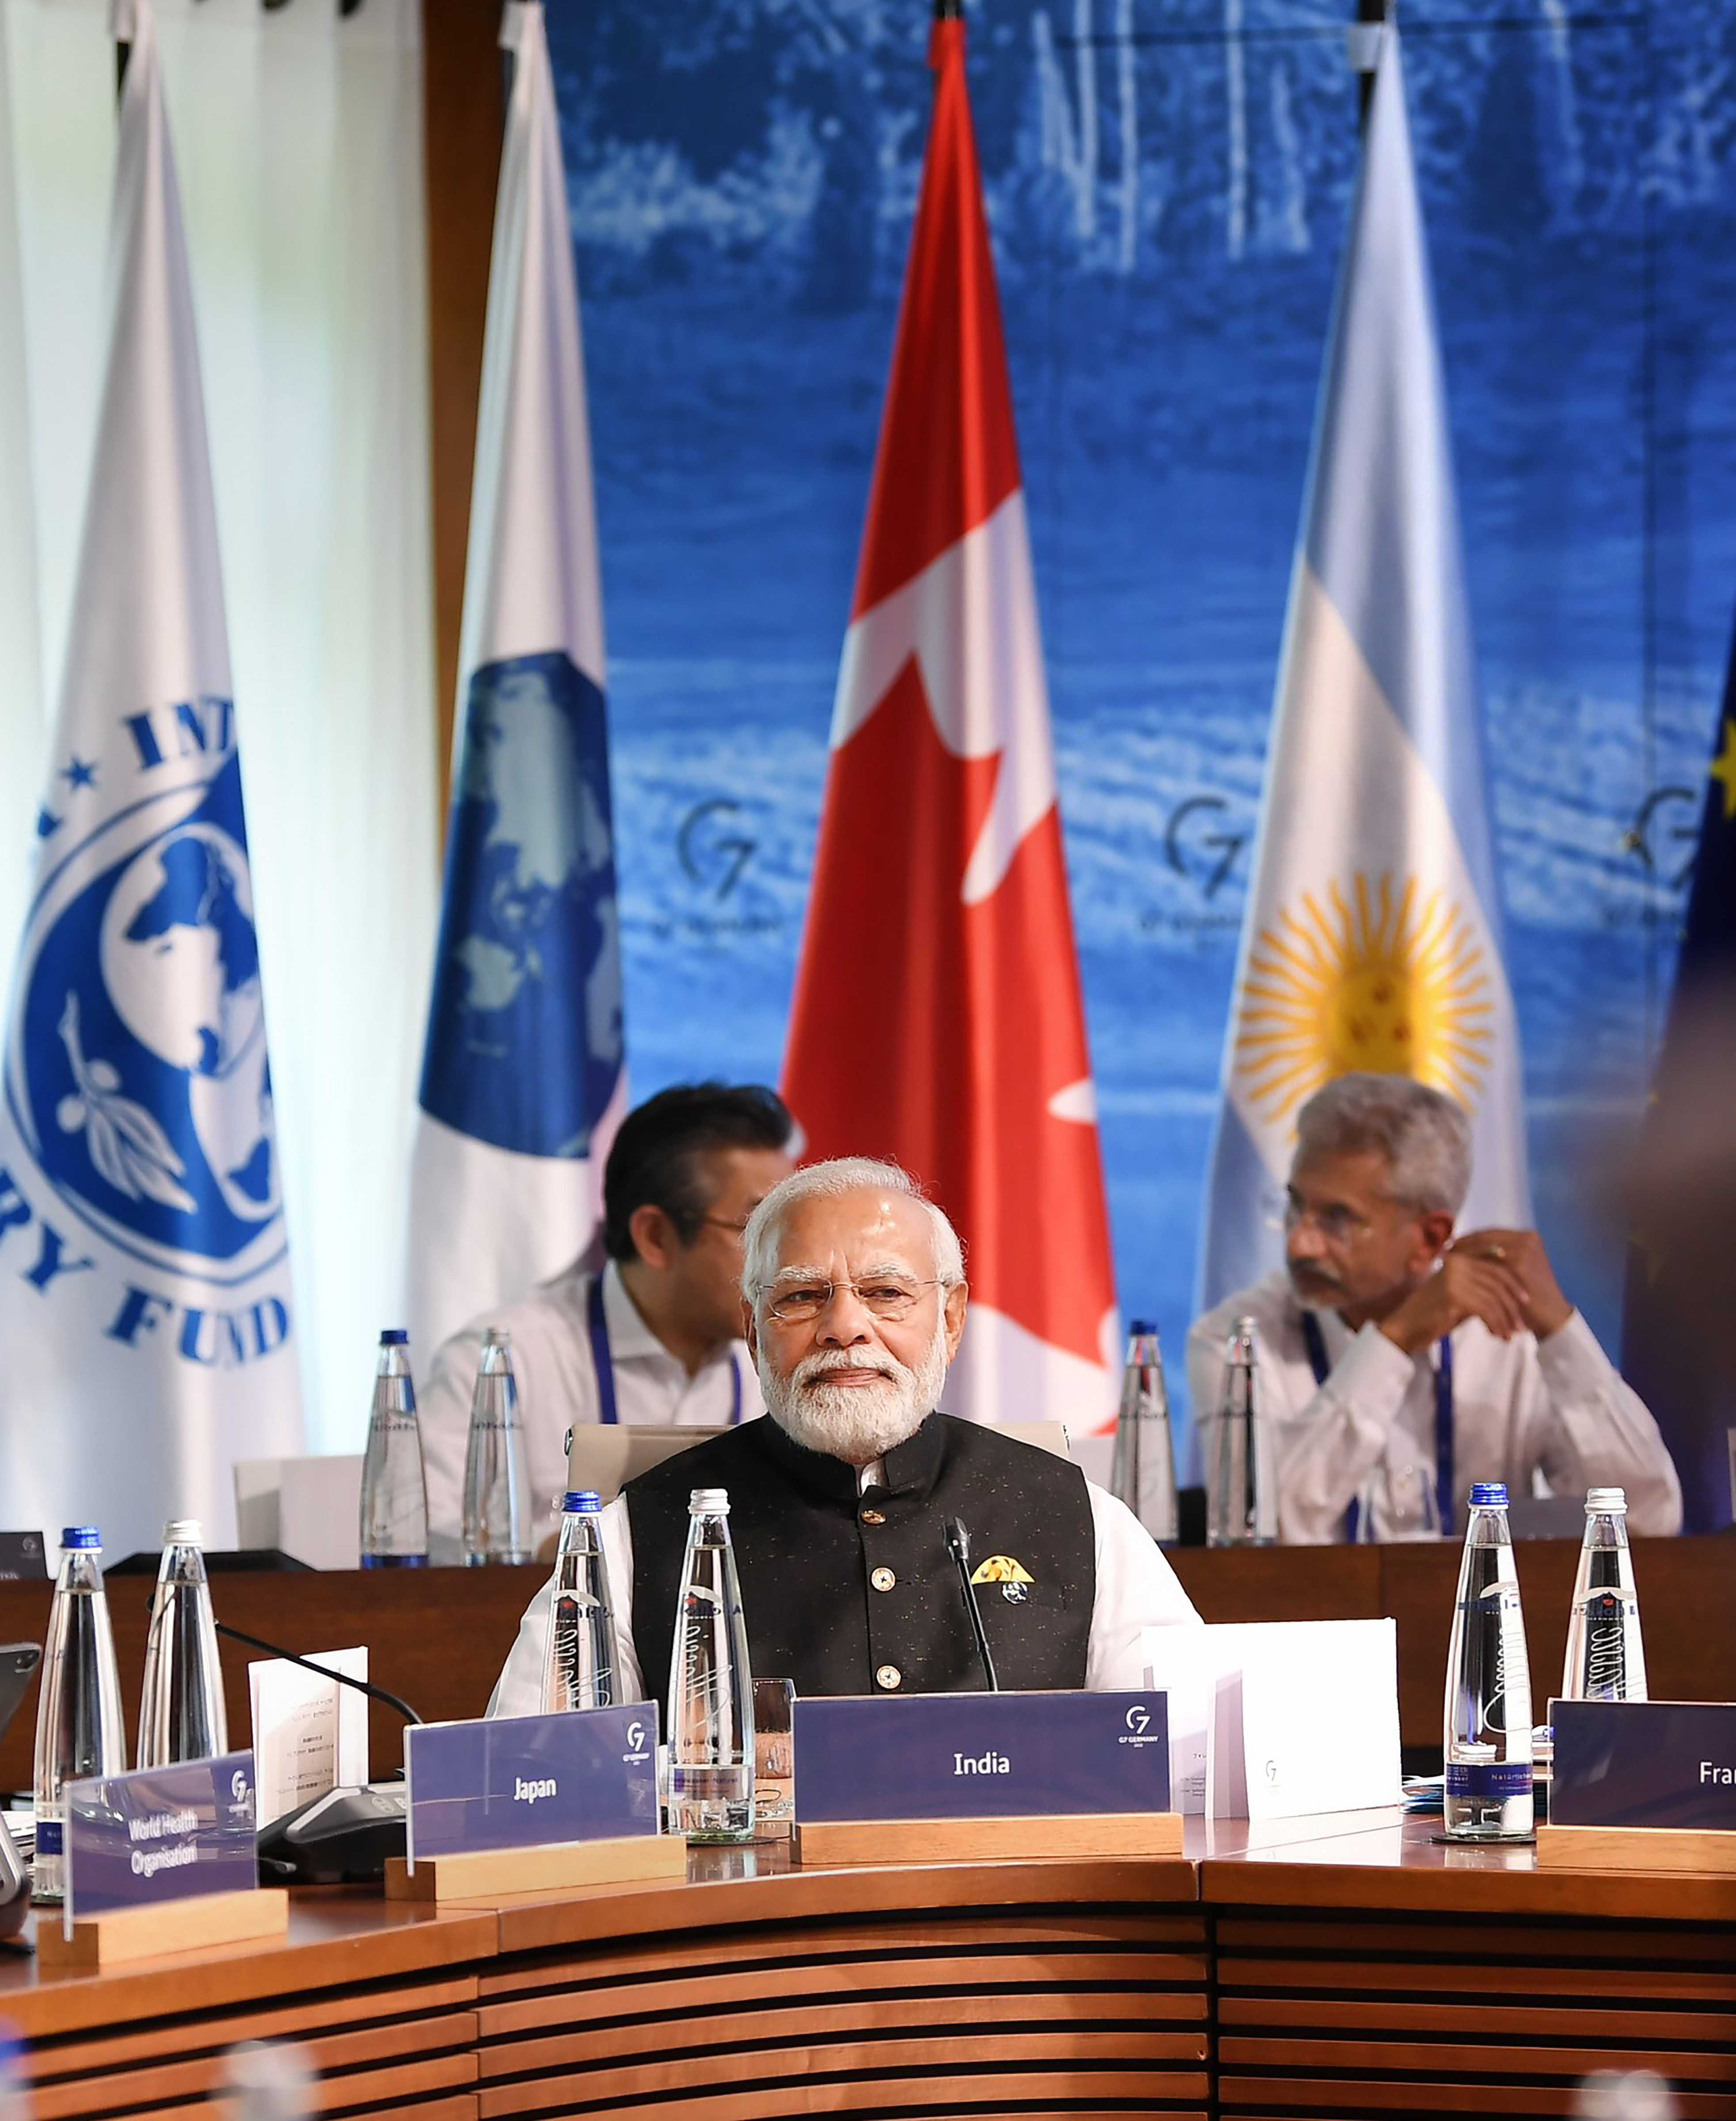 India will continue to do what is best in interests of own energy security: Modi at G7 Summit in Germany